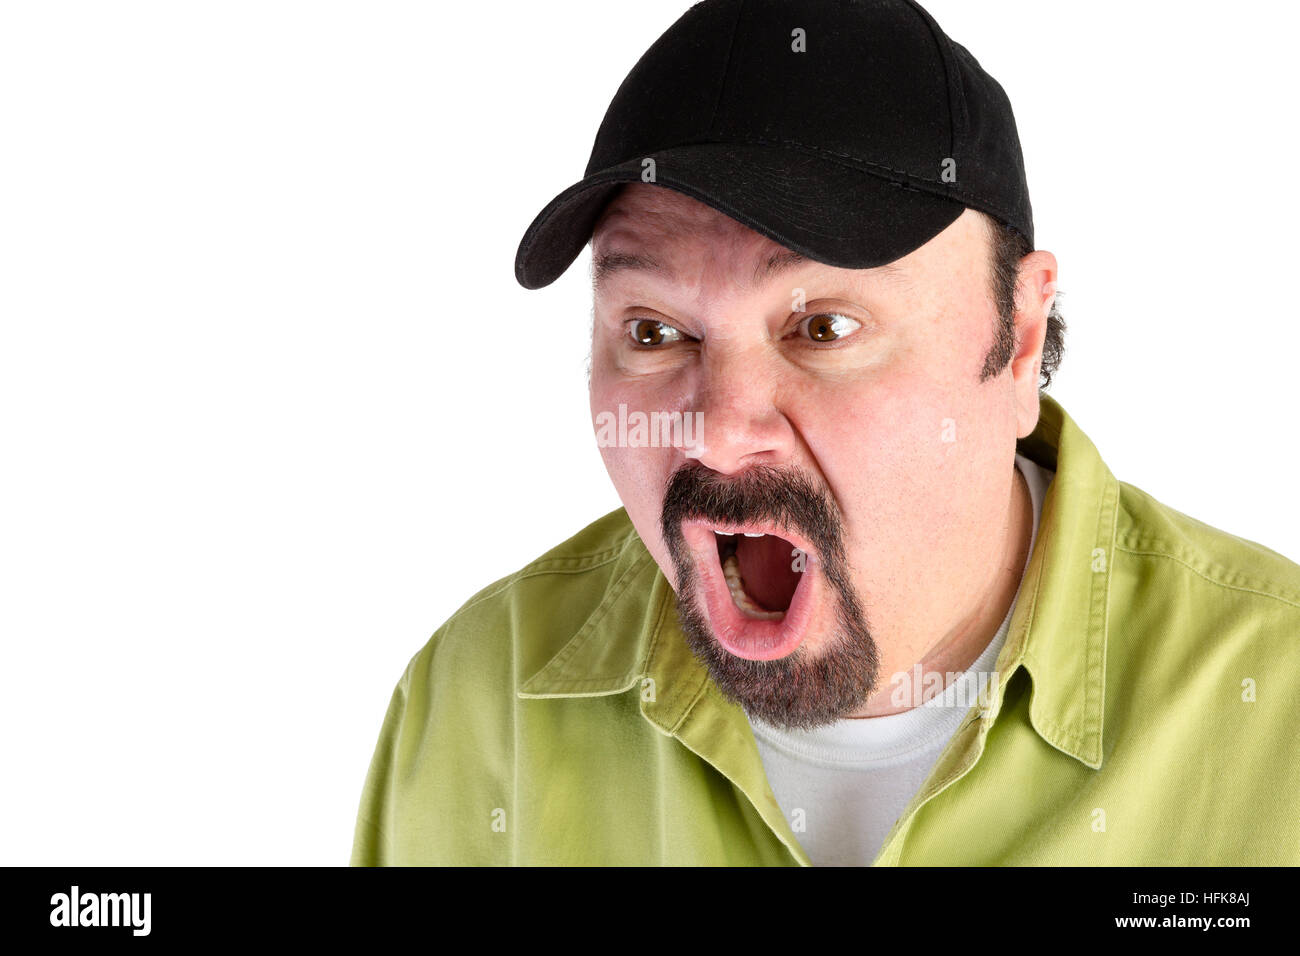 Portrait of horrified man in baseball cap shouting on white with copy space Stock Photo